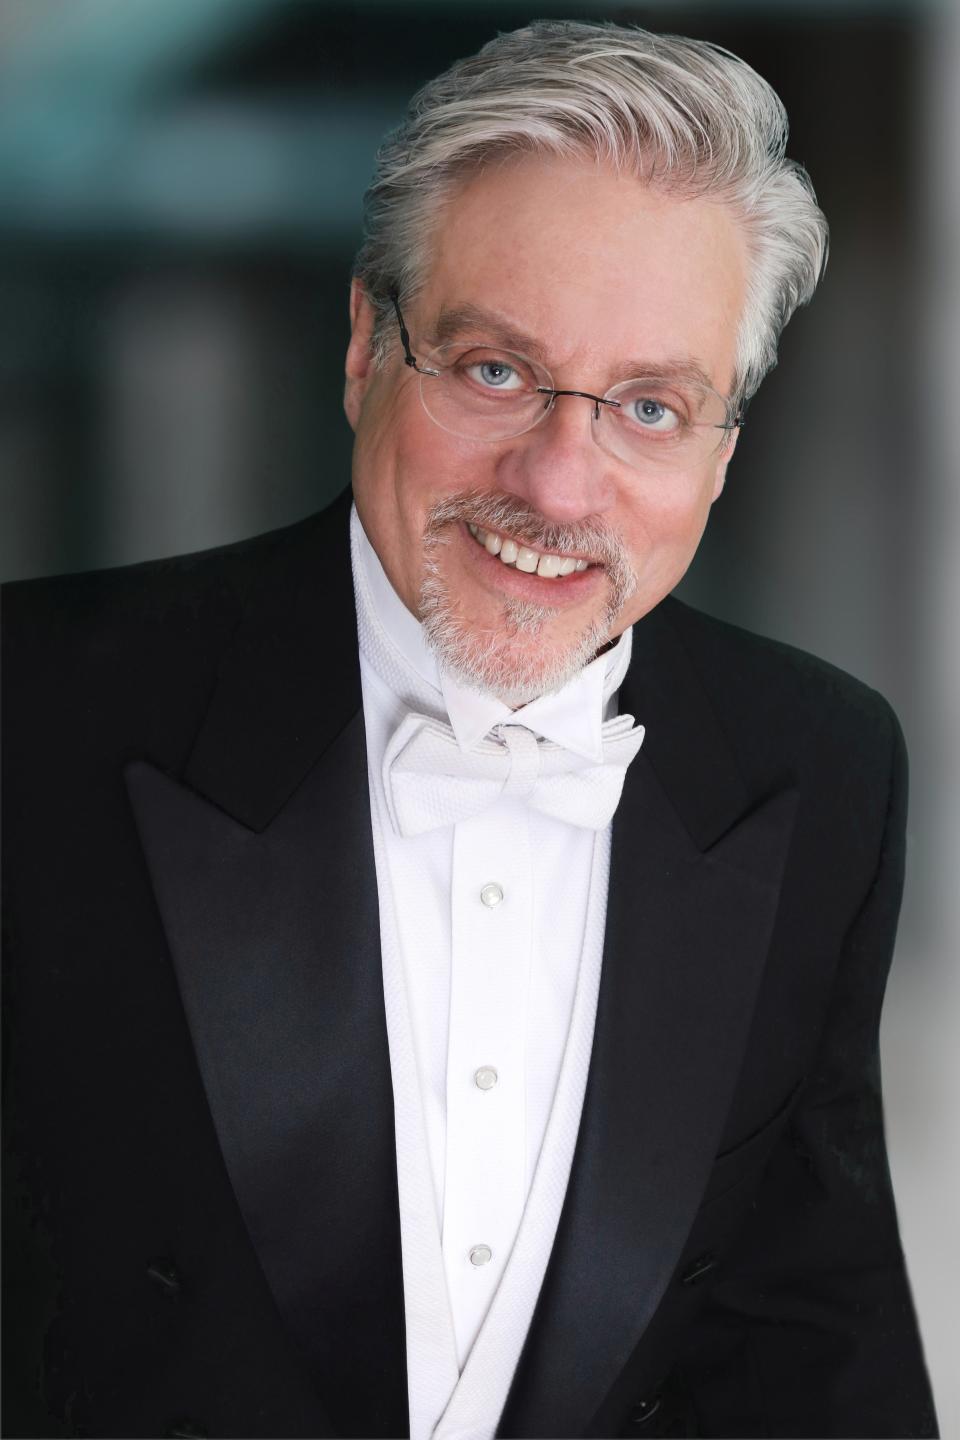 In addition to being the new conductor of the Columbus Symphony Chorus, Stephen Caracciolo is also the artistic director of LancasterChorale.